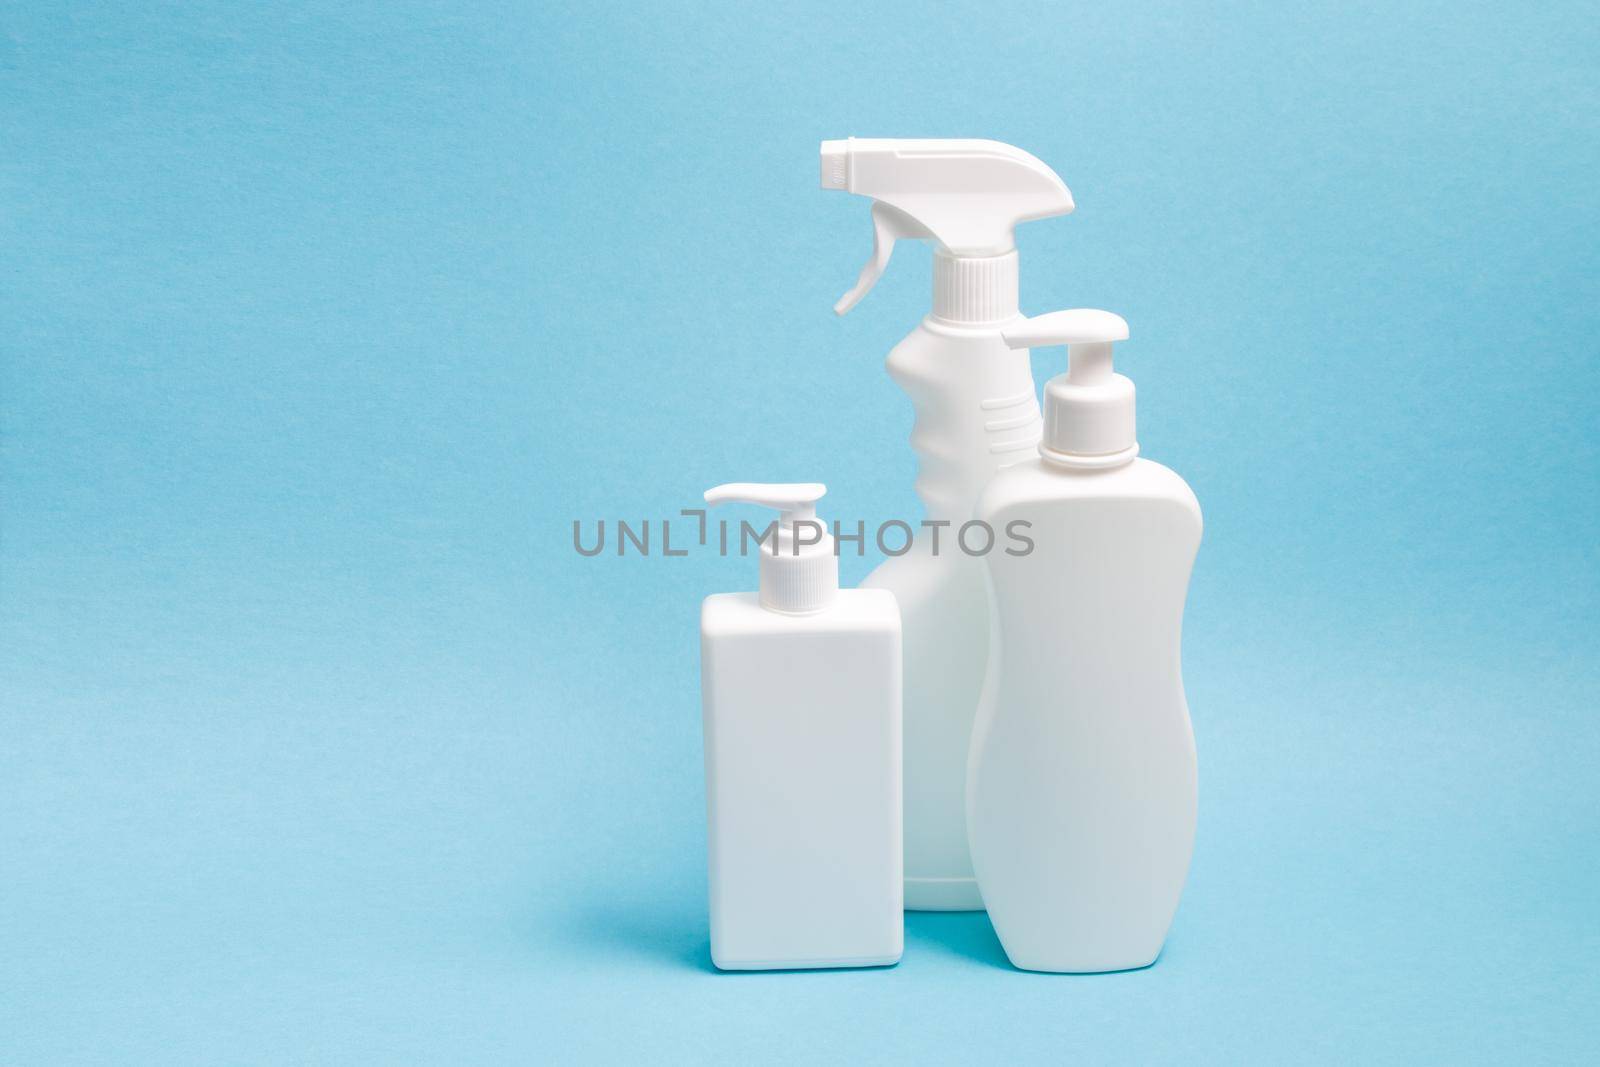 several white plastic bottles with different types of dispensers on a blue background, two white unbranded dispenser bottles and a spray bottle